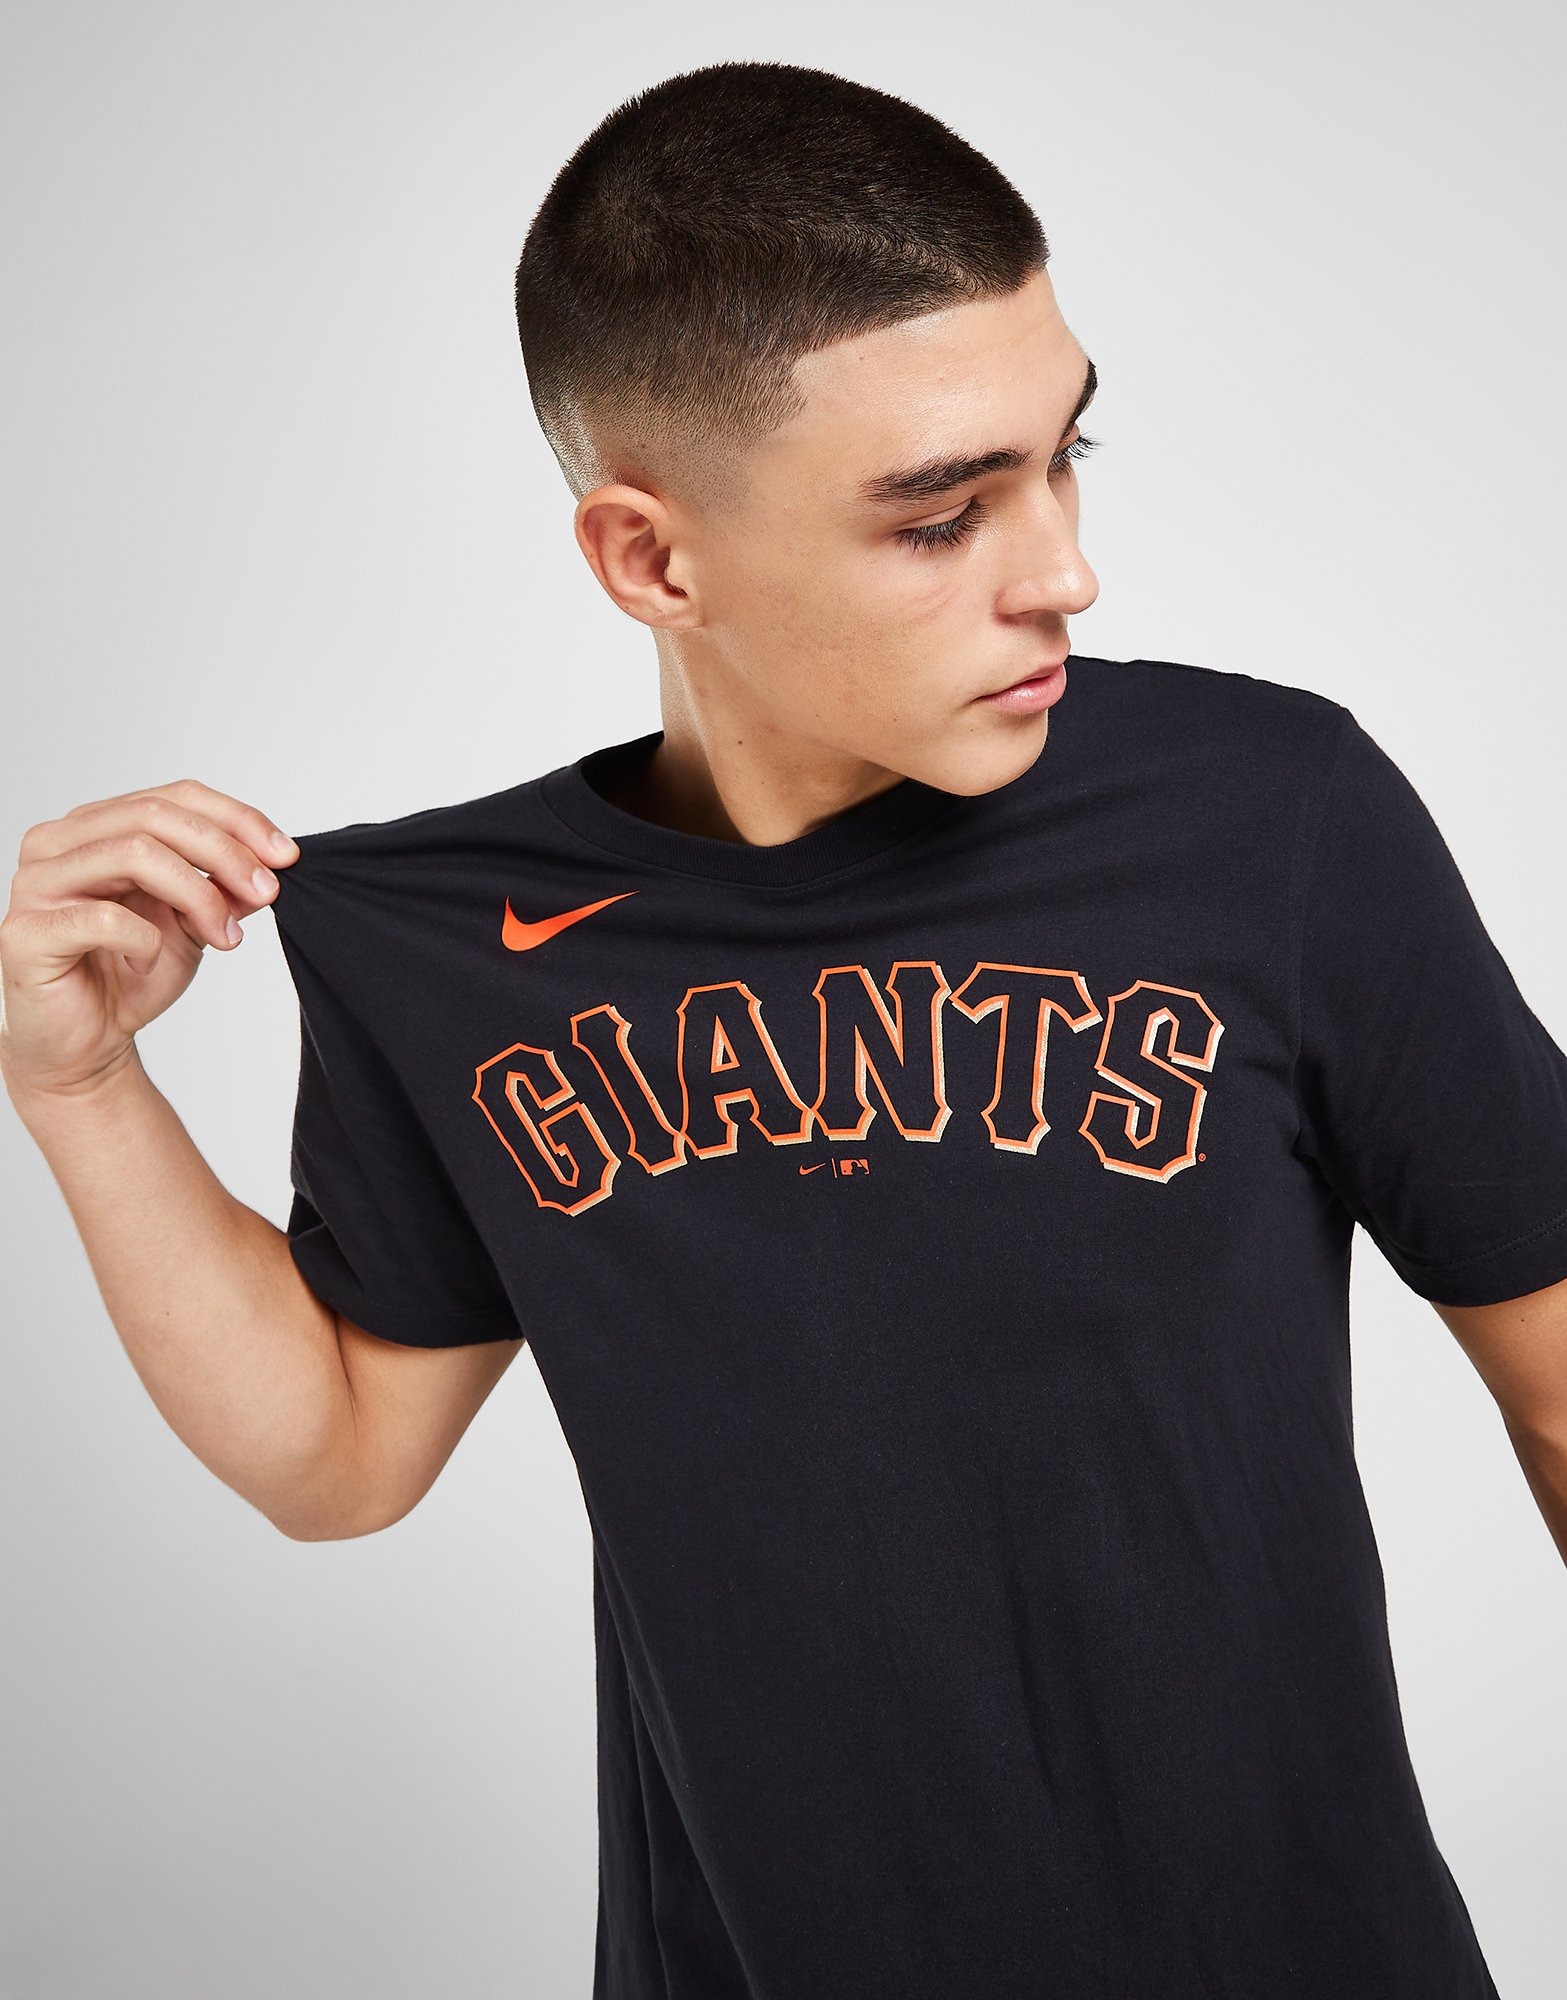 San Francisco Giants MLB Genuine Apparel Kids Youth Size Athletic Shirt New  Tags